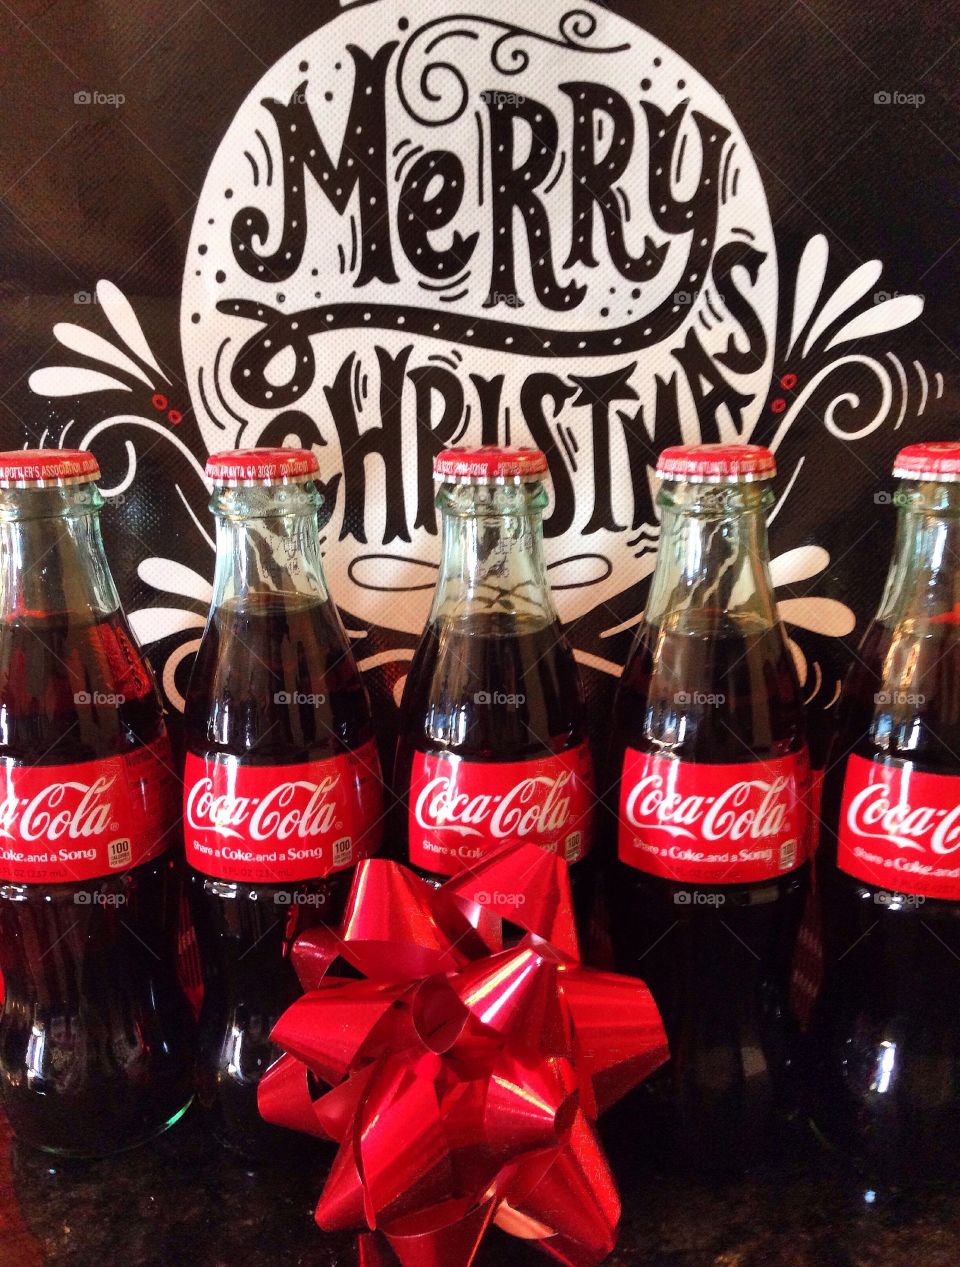 Merry Christmas from Coca-Cola!